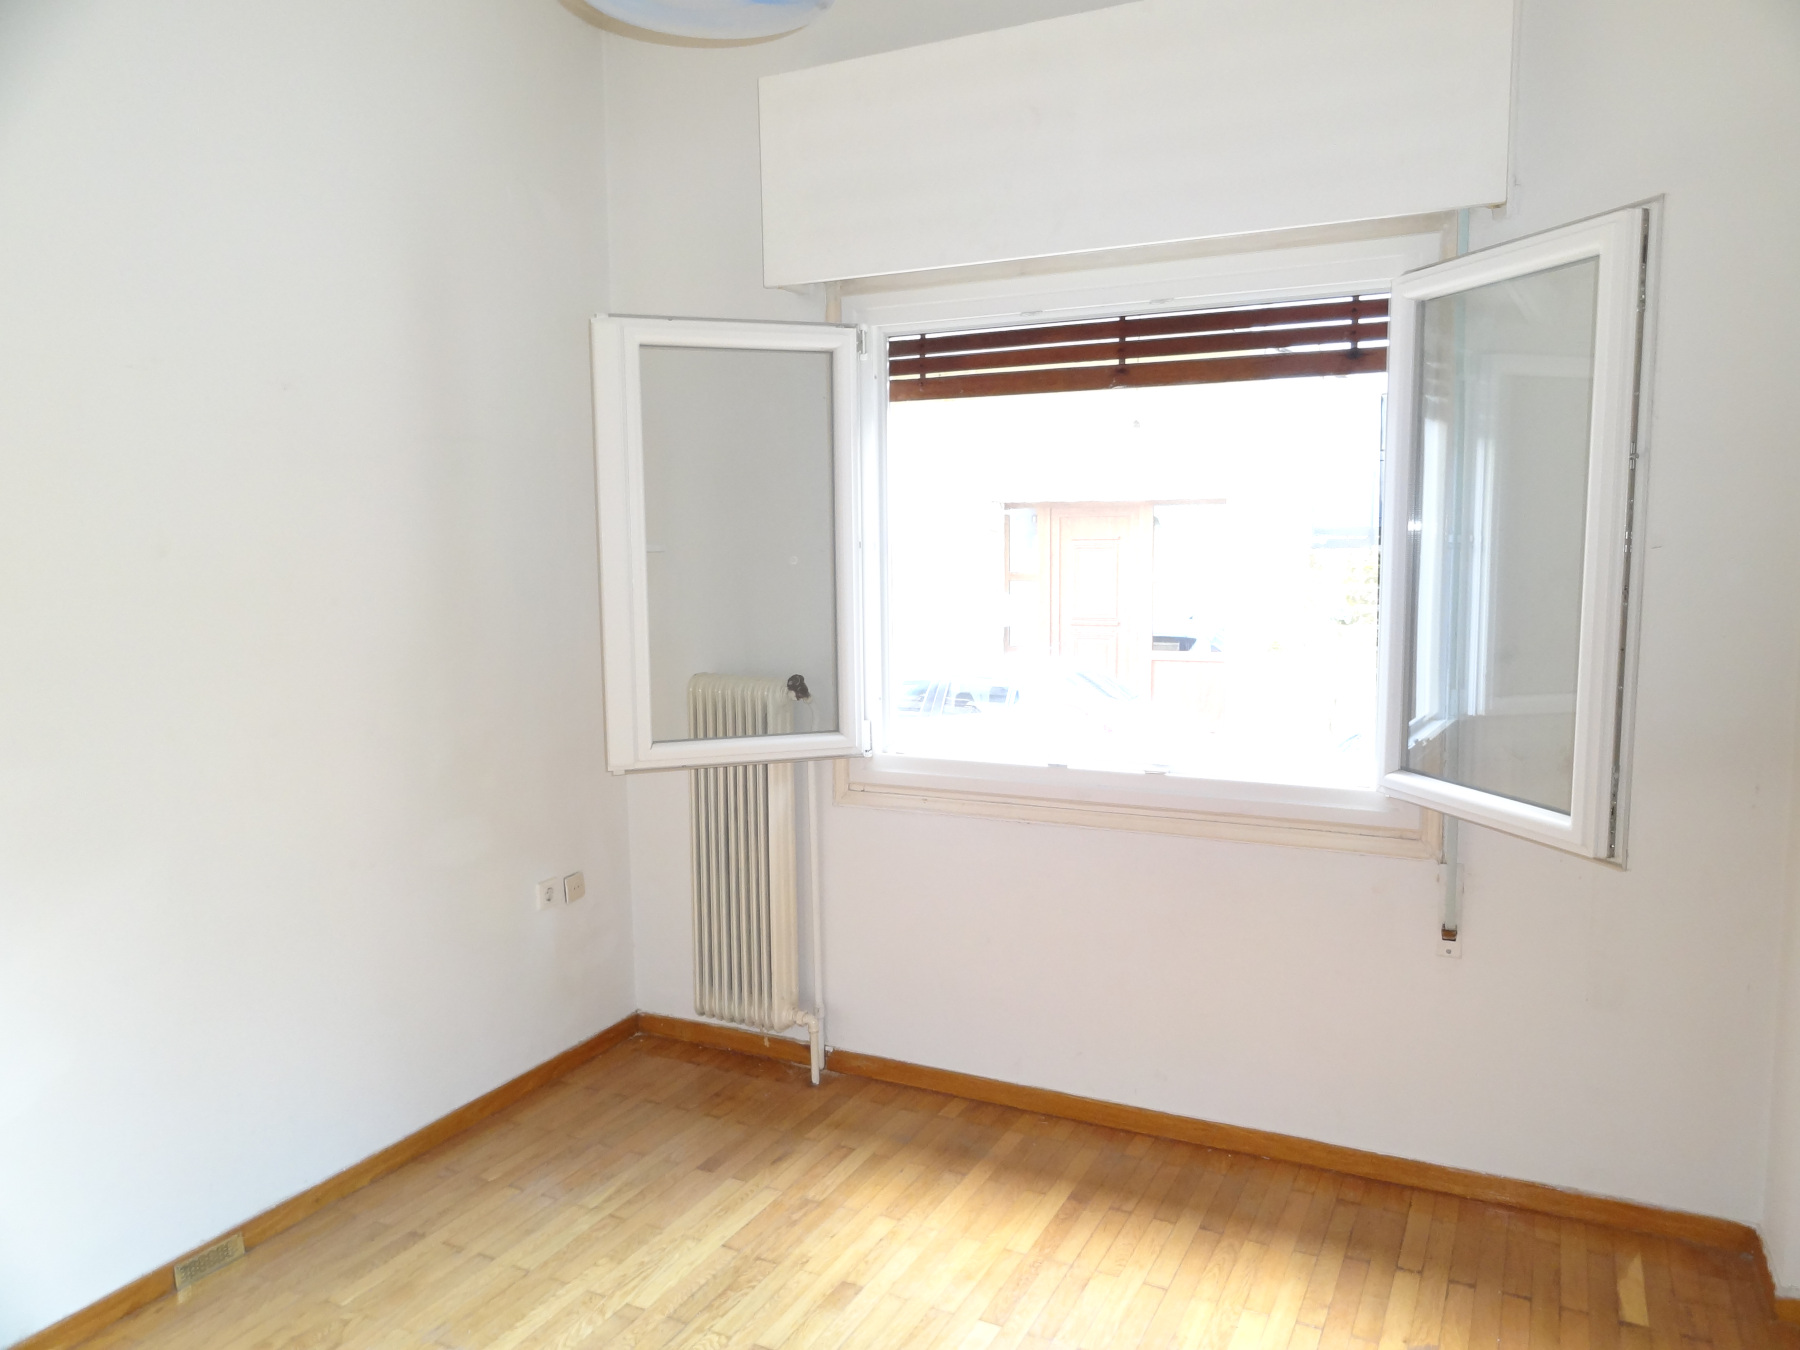 For rent, a spacious 1 bedroom apartment of 64 sq.m. 1st floor for students near the center of Ioannina